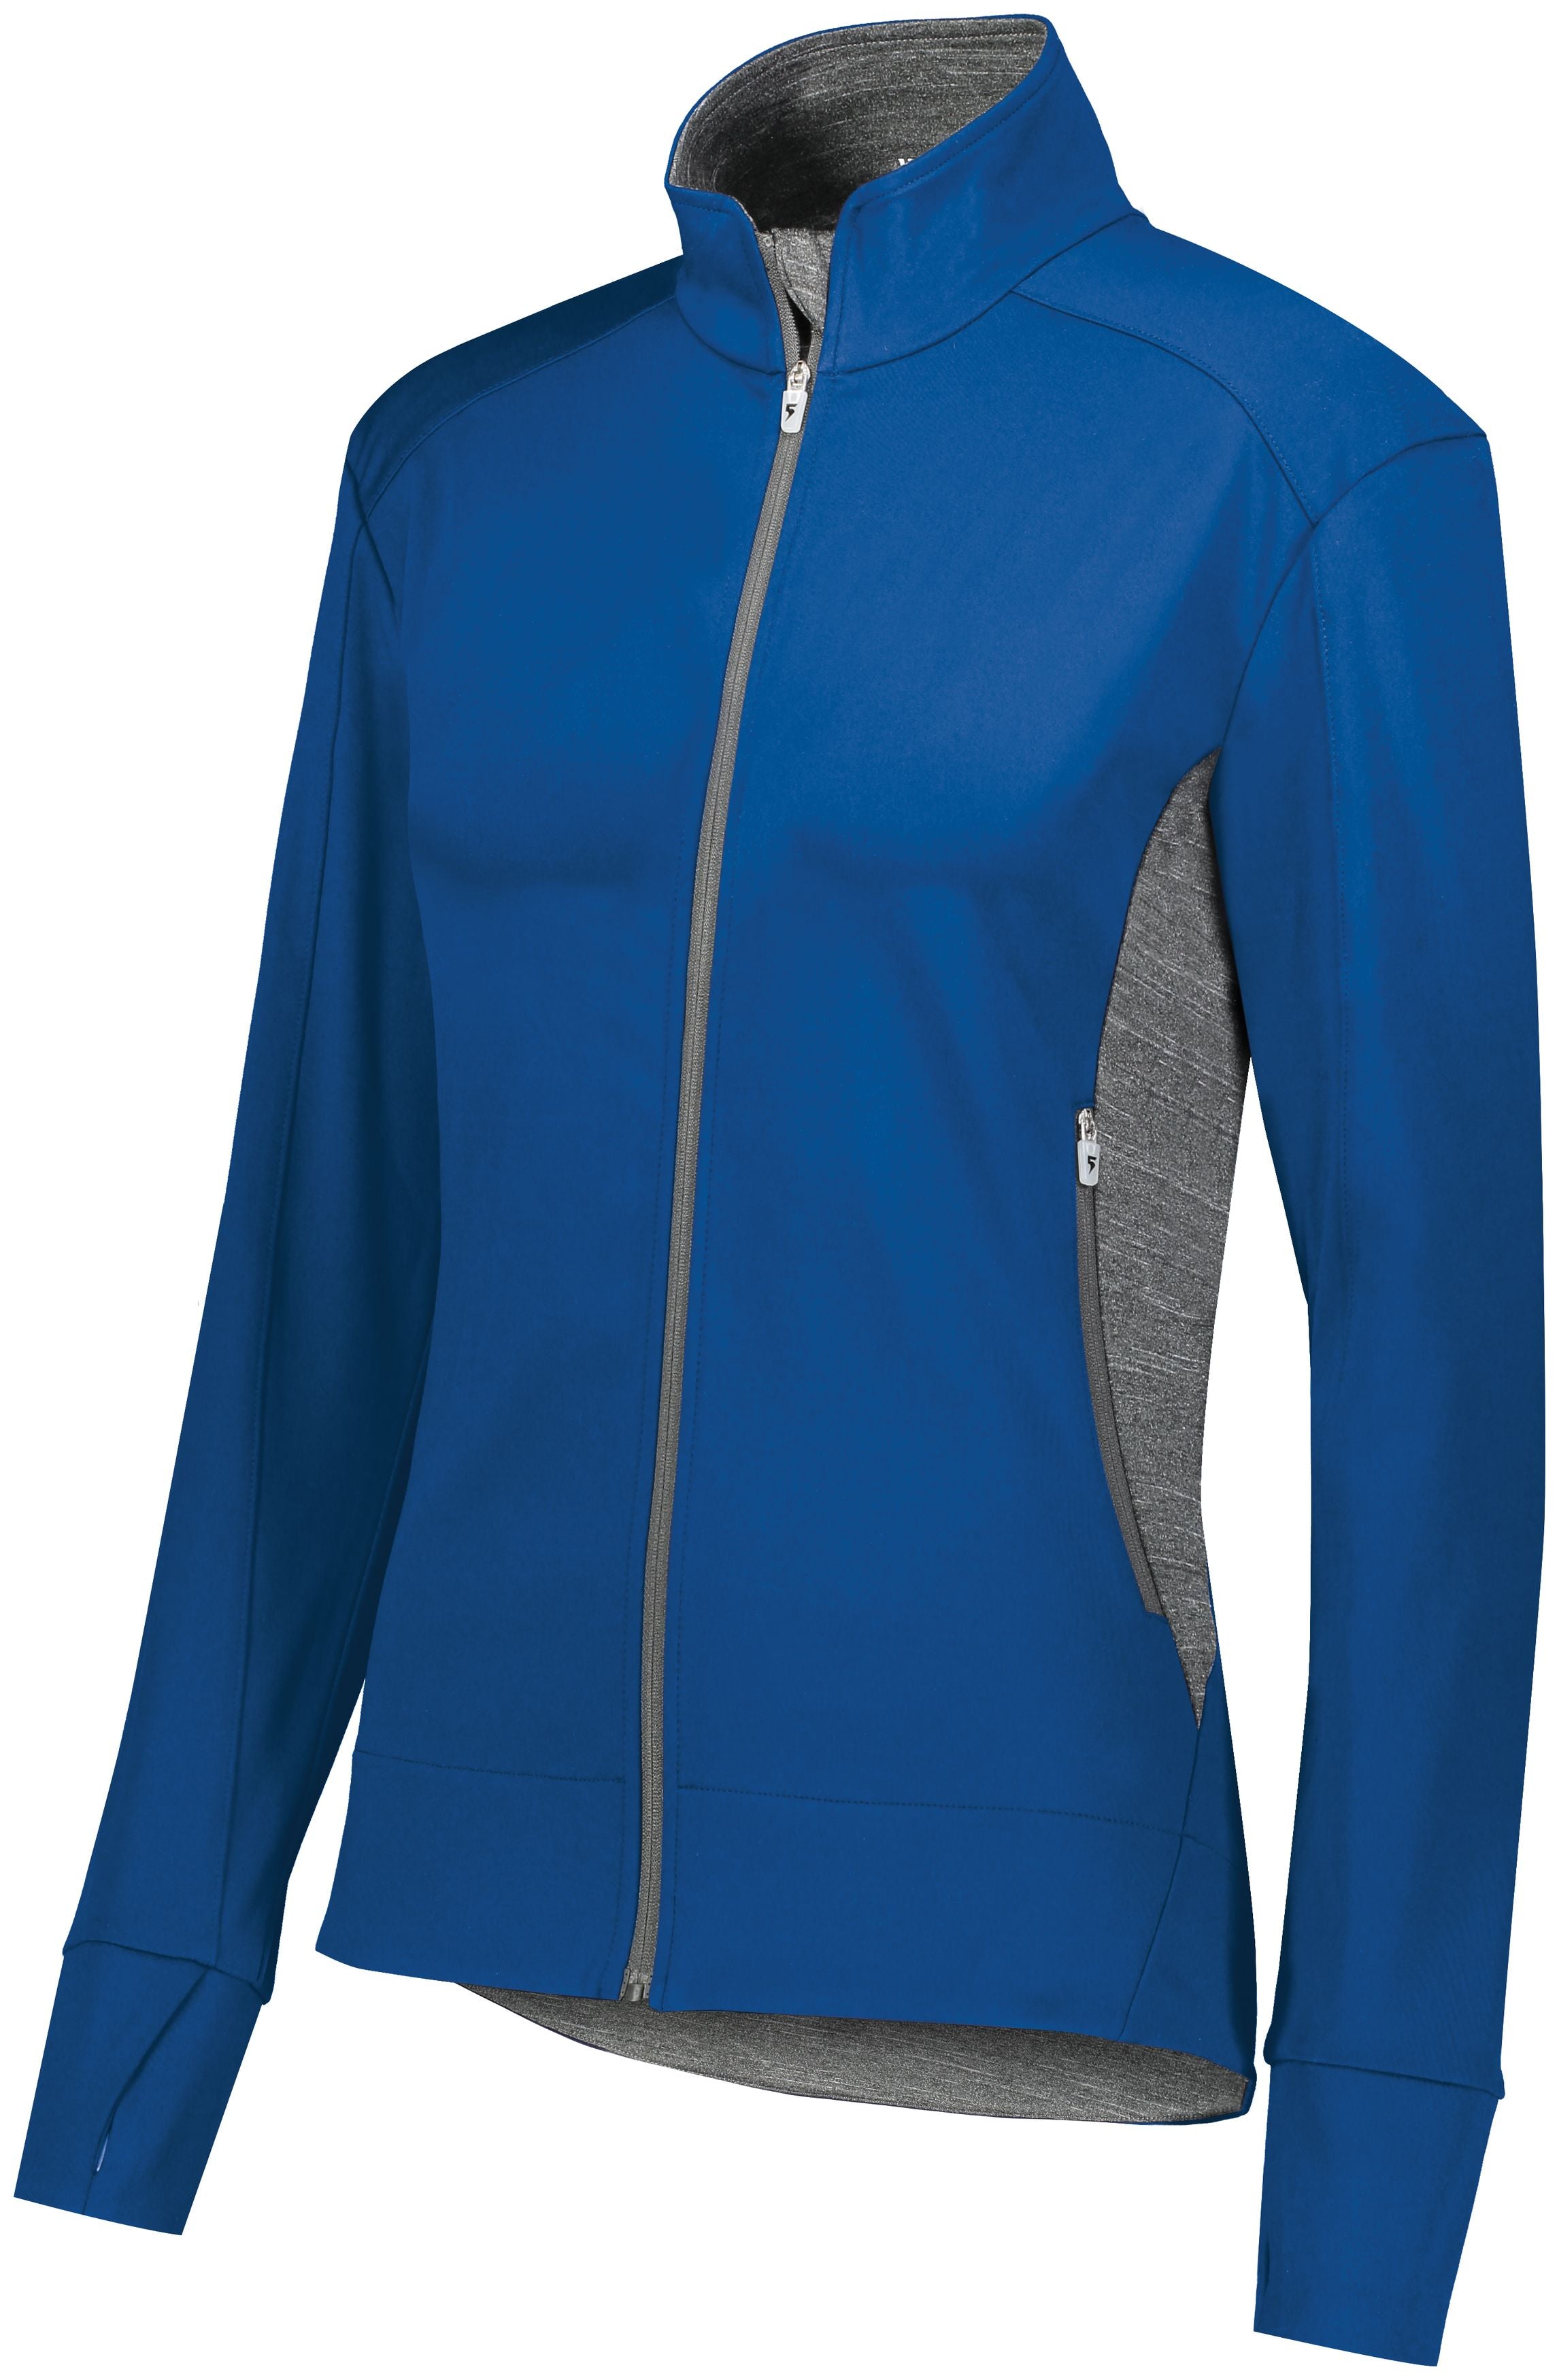 High 5 Ladies Free Form Jacket in Royal/Carbon Heather  -Part of the Ladies, Ladies-Jacket, High5-Products, Outerwear product lines at KanaleyCreations.com